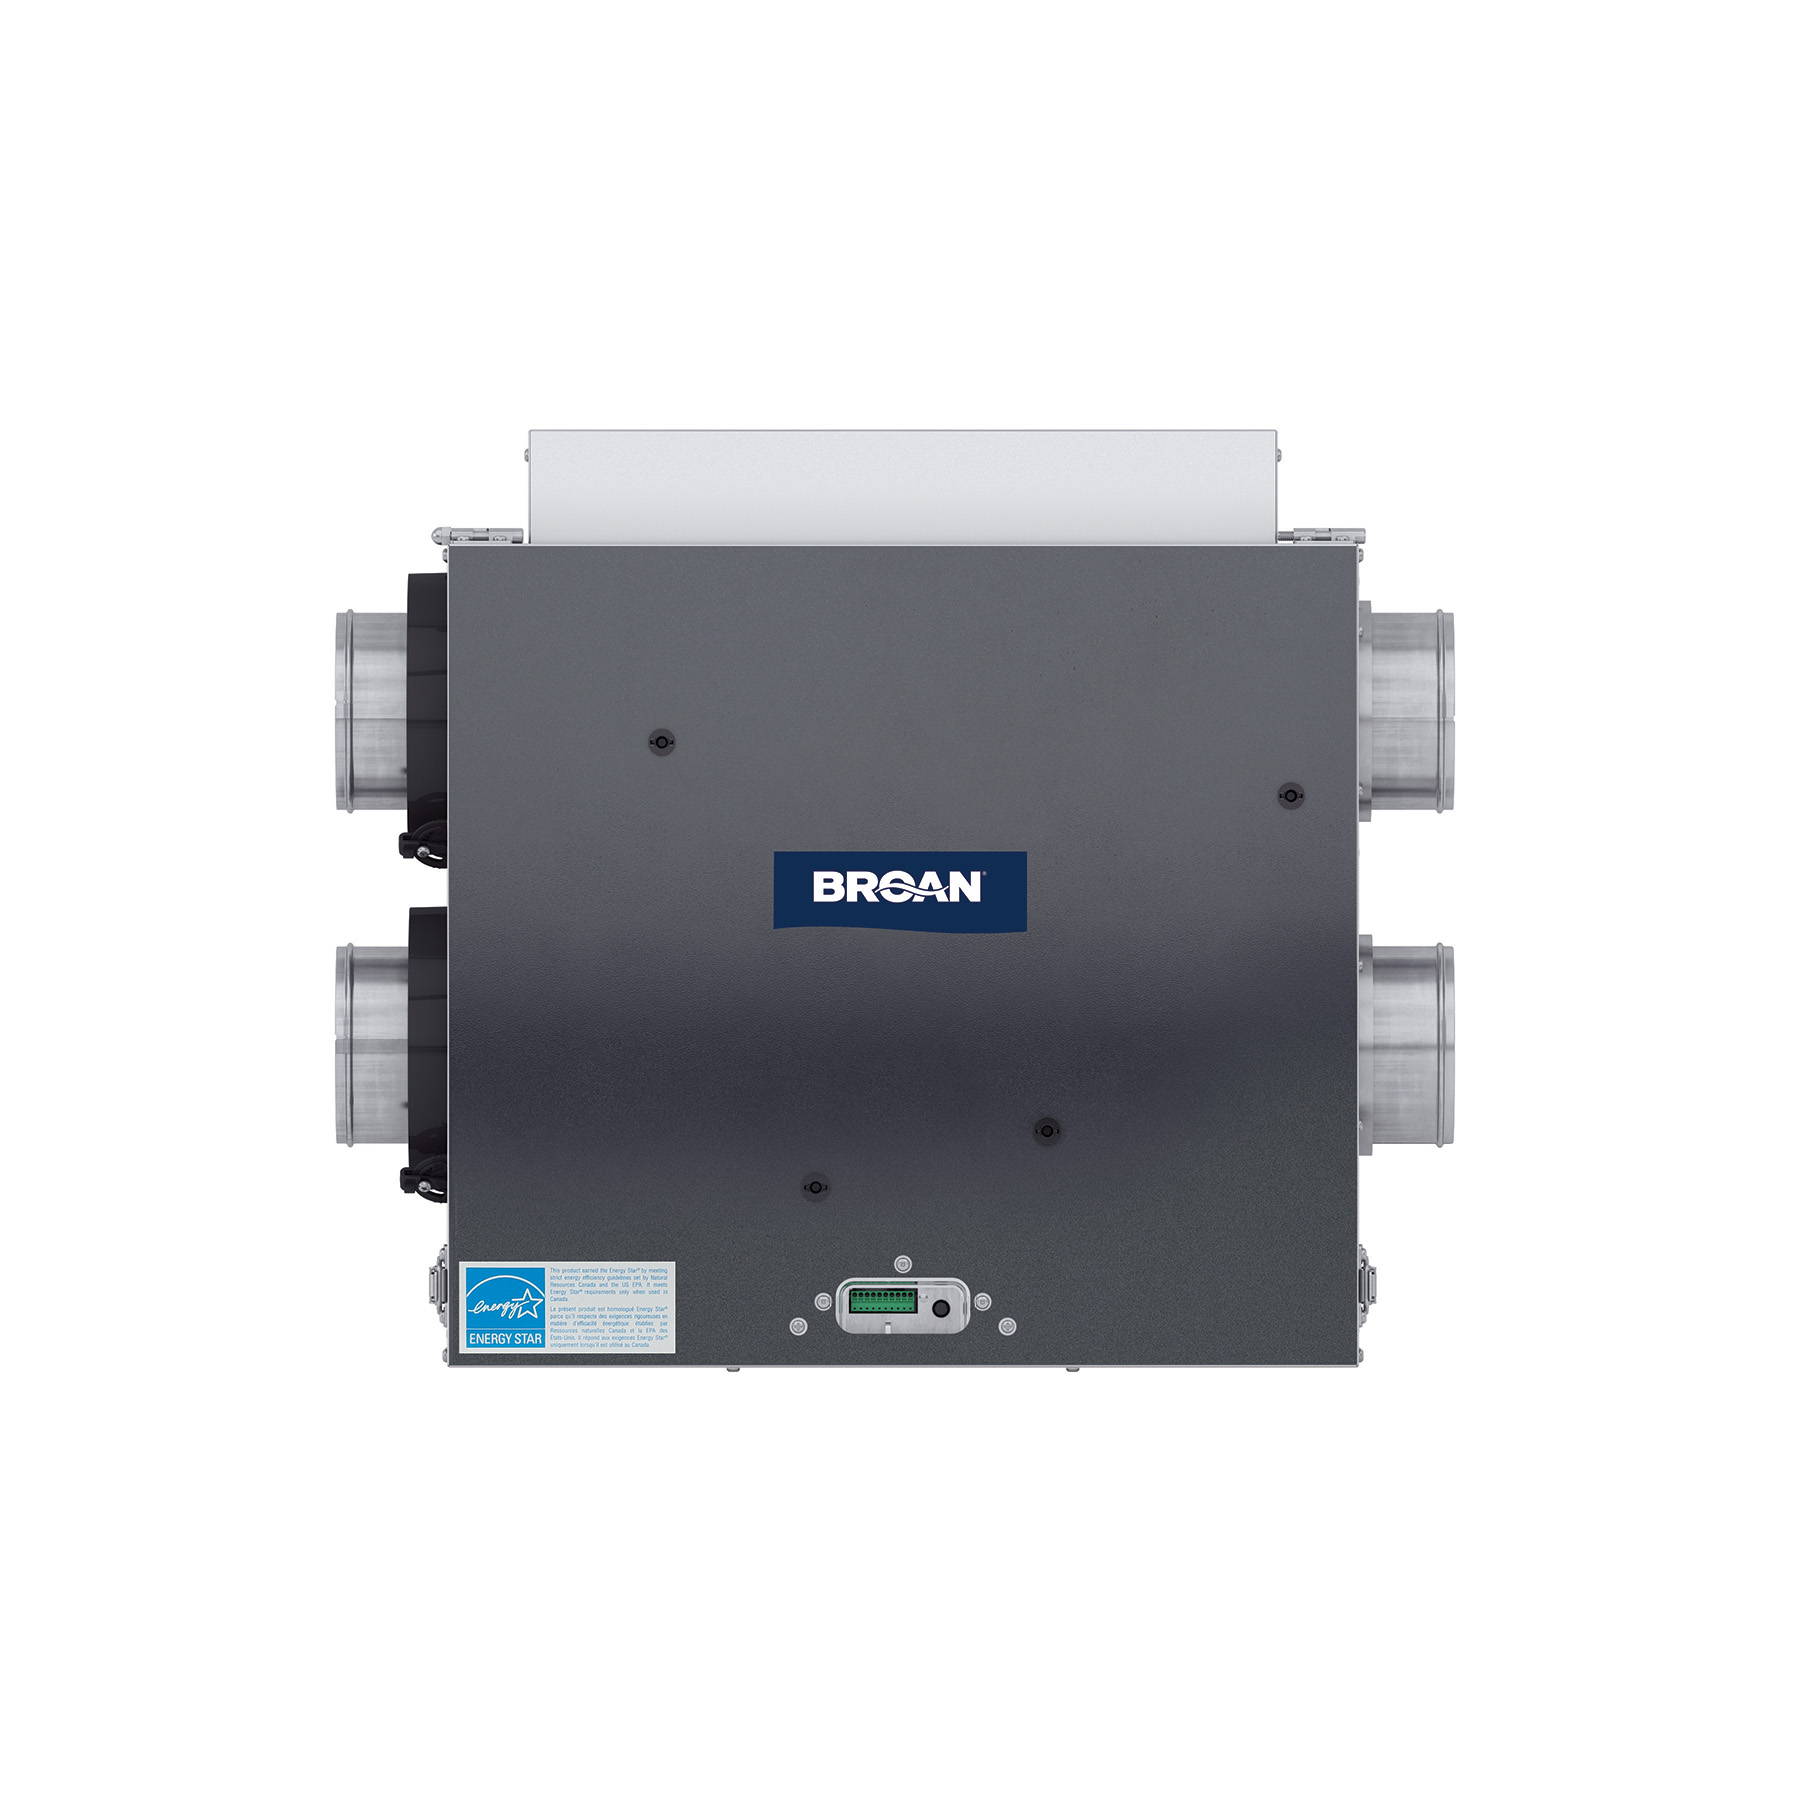 Broan® Energy Recovery Ventilator for high-rise residential towers and southern regions